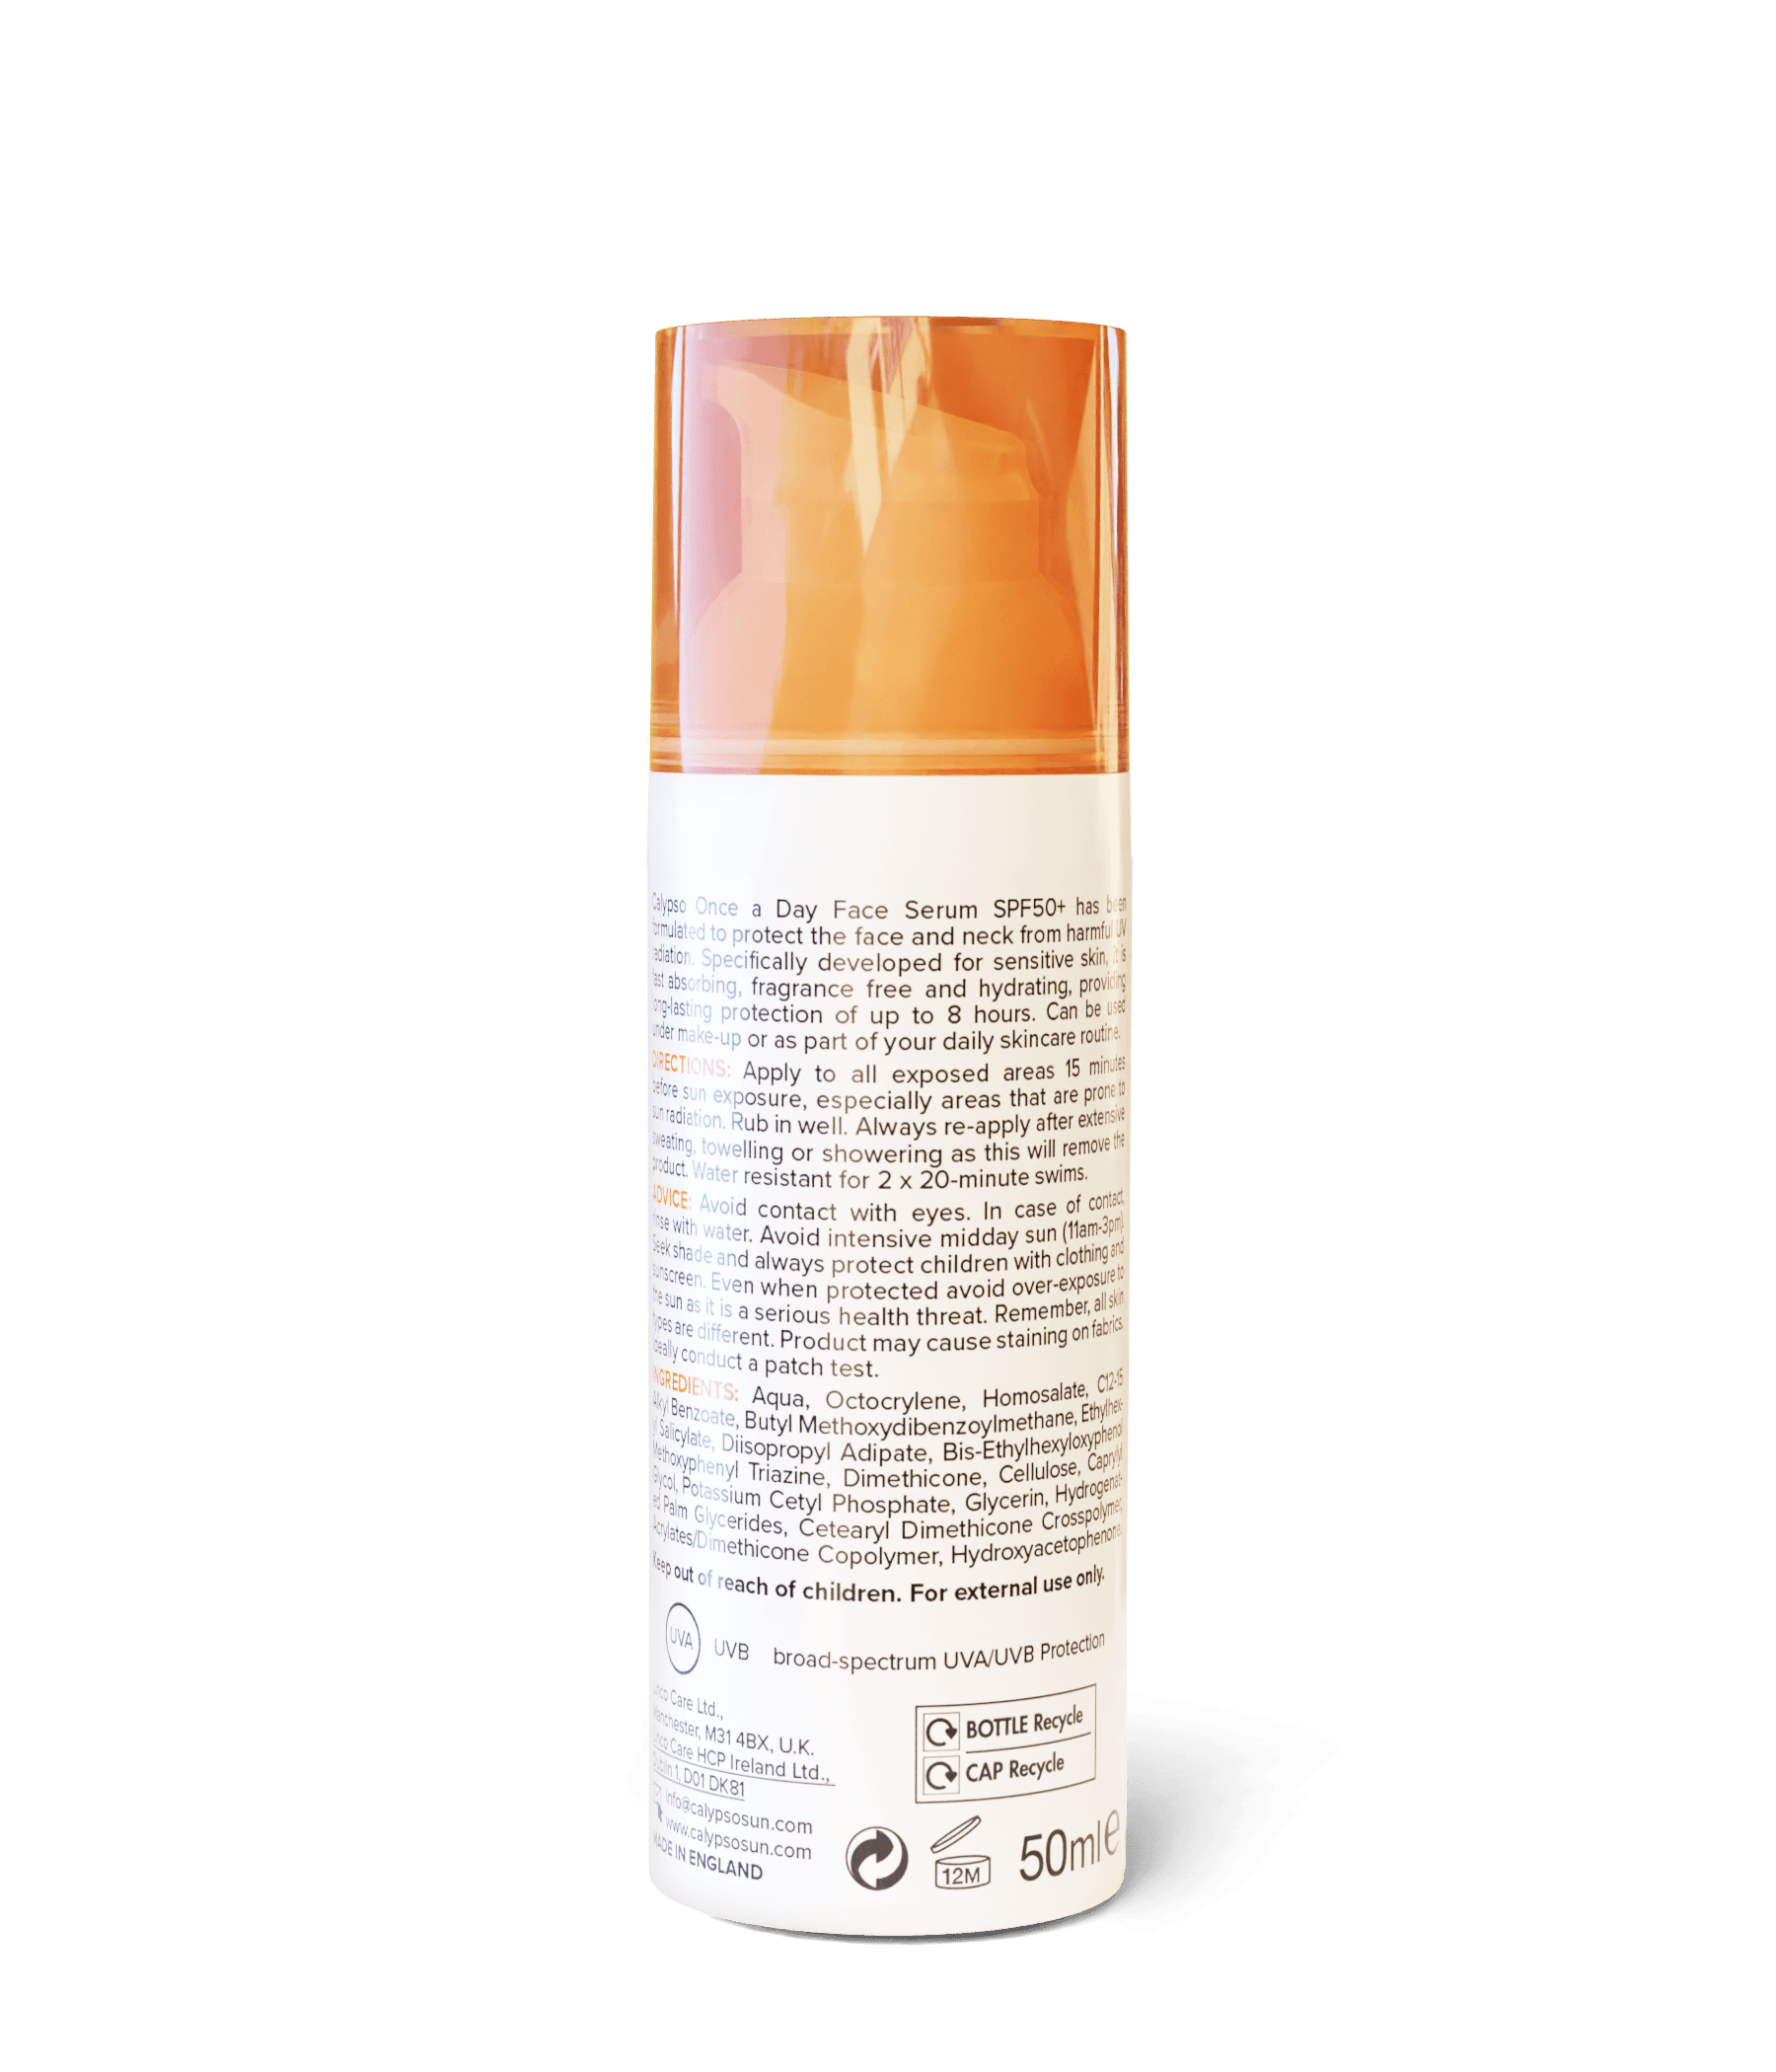 Calypso Once a Day Serum SPF50+ with vitamin c, bottle back